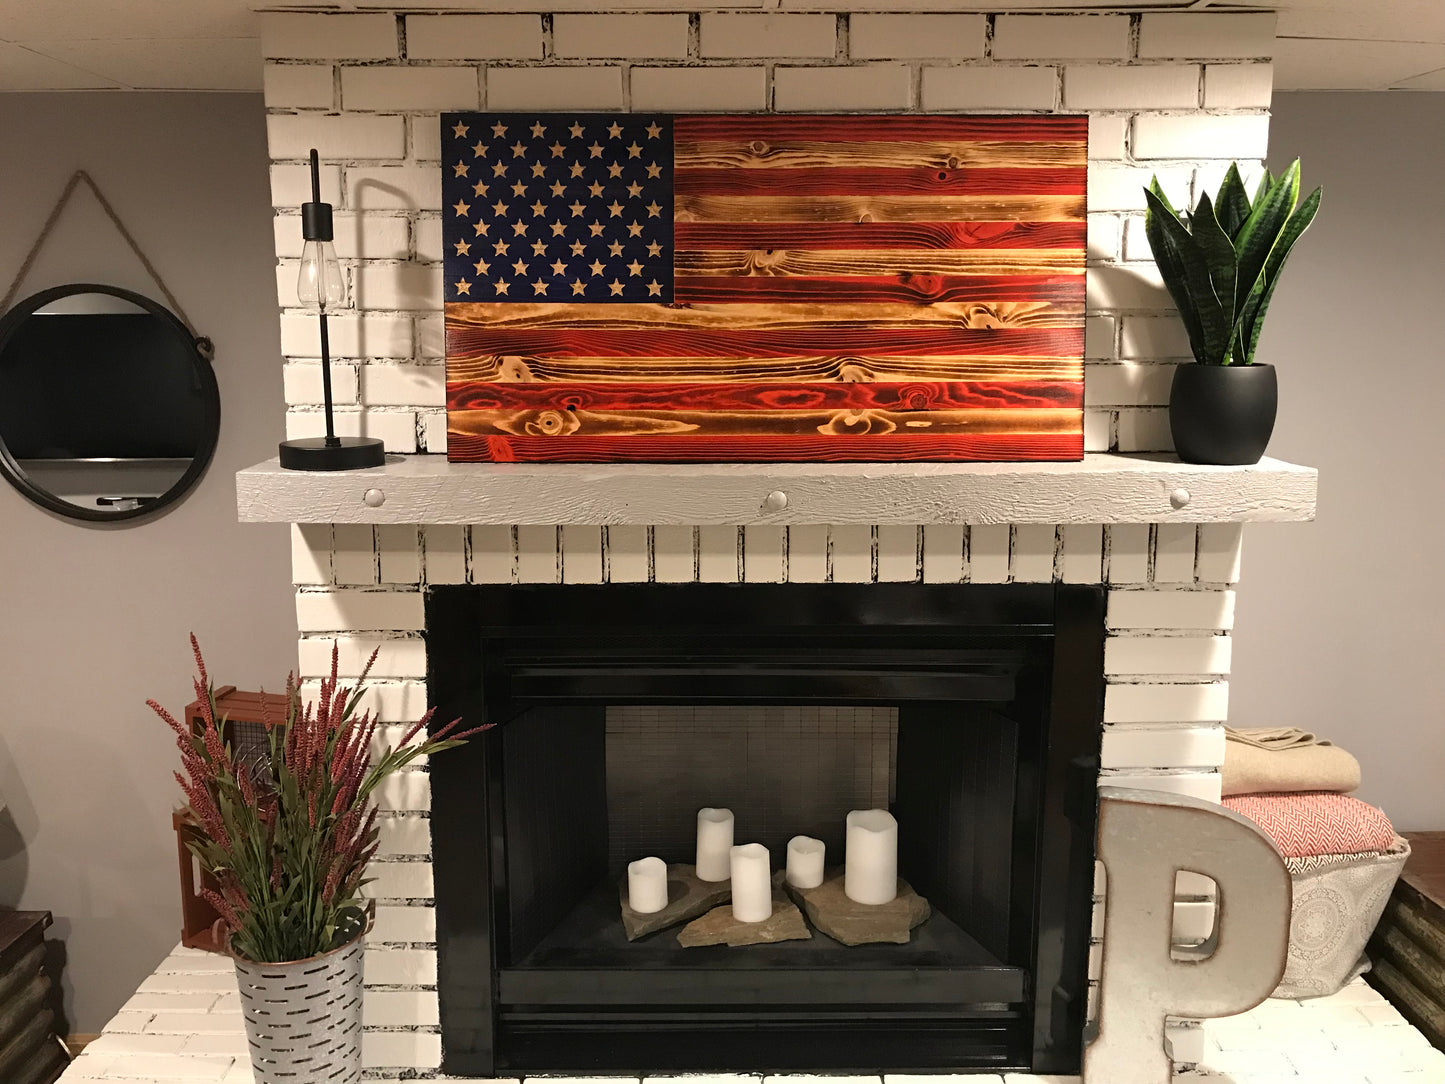 The We The People Natural Concealment Flag - American Flag